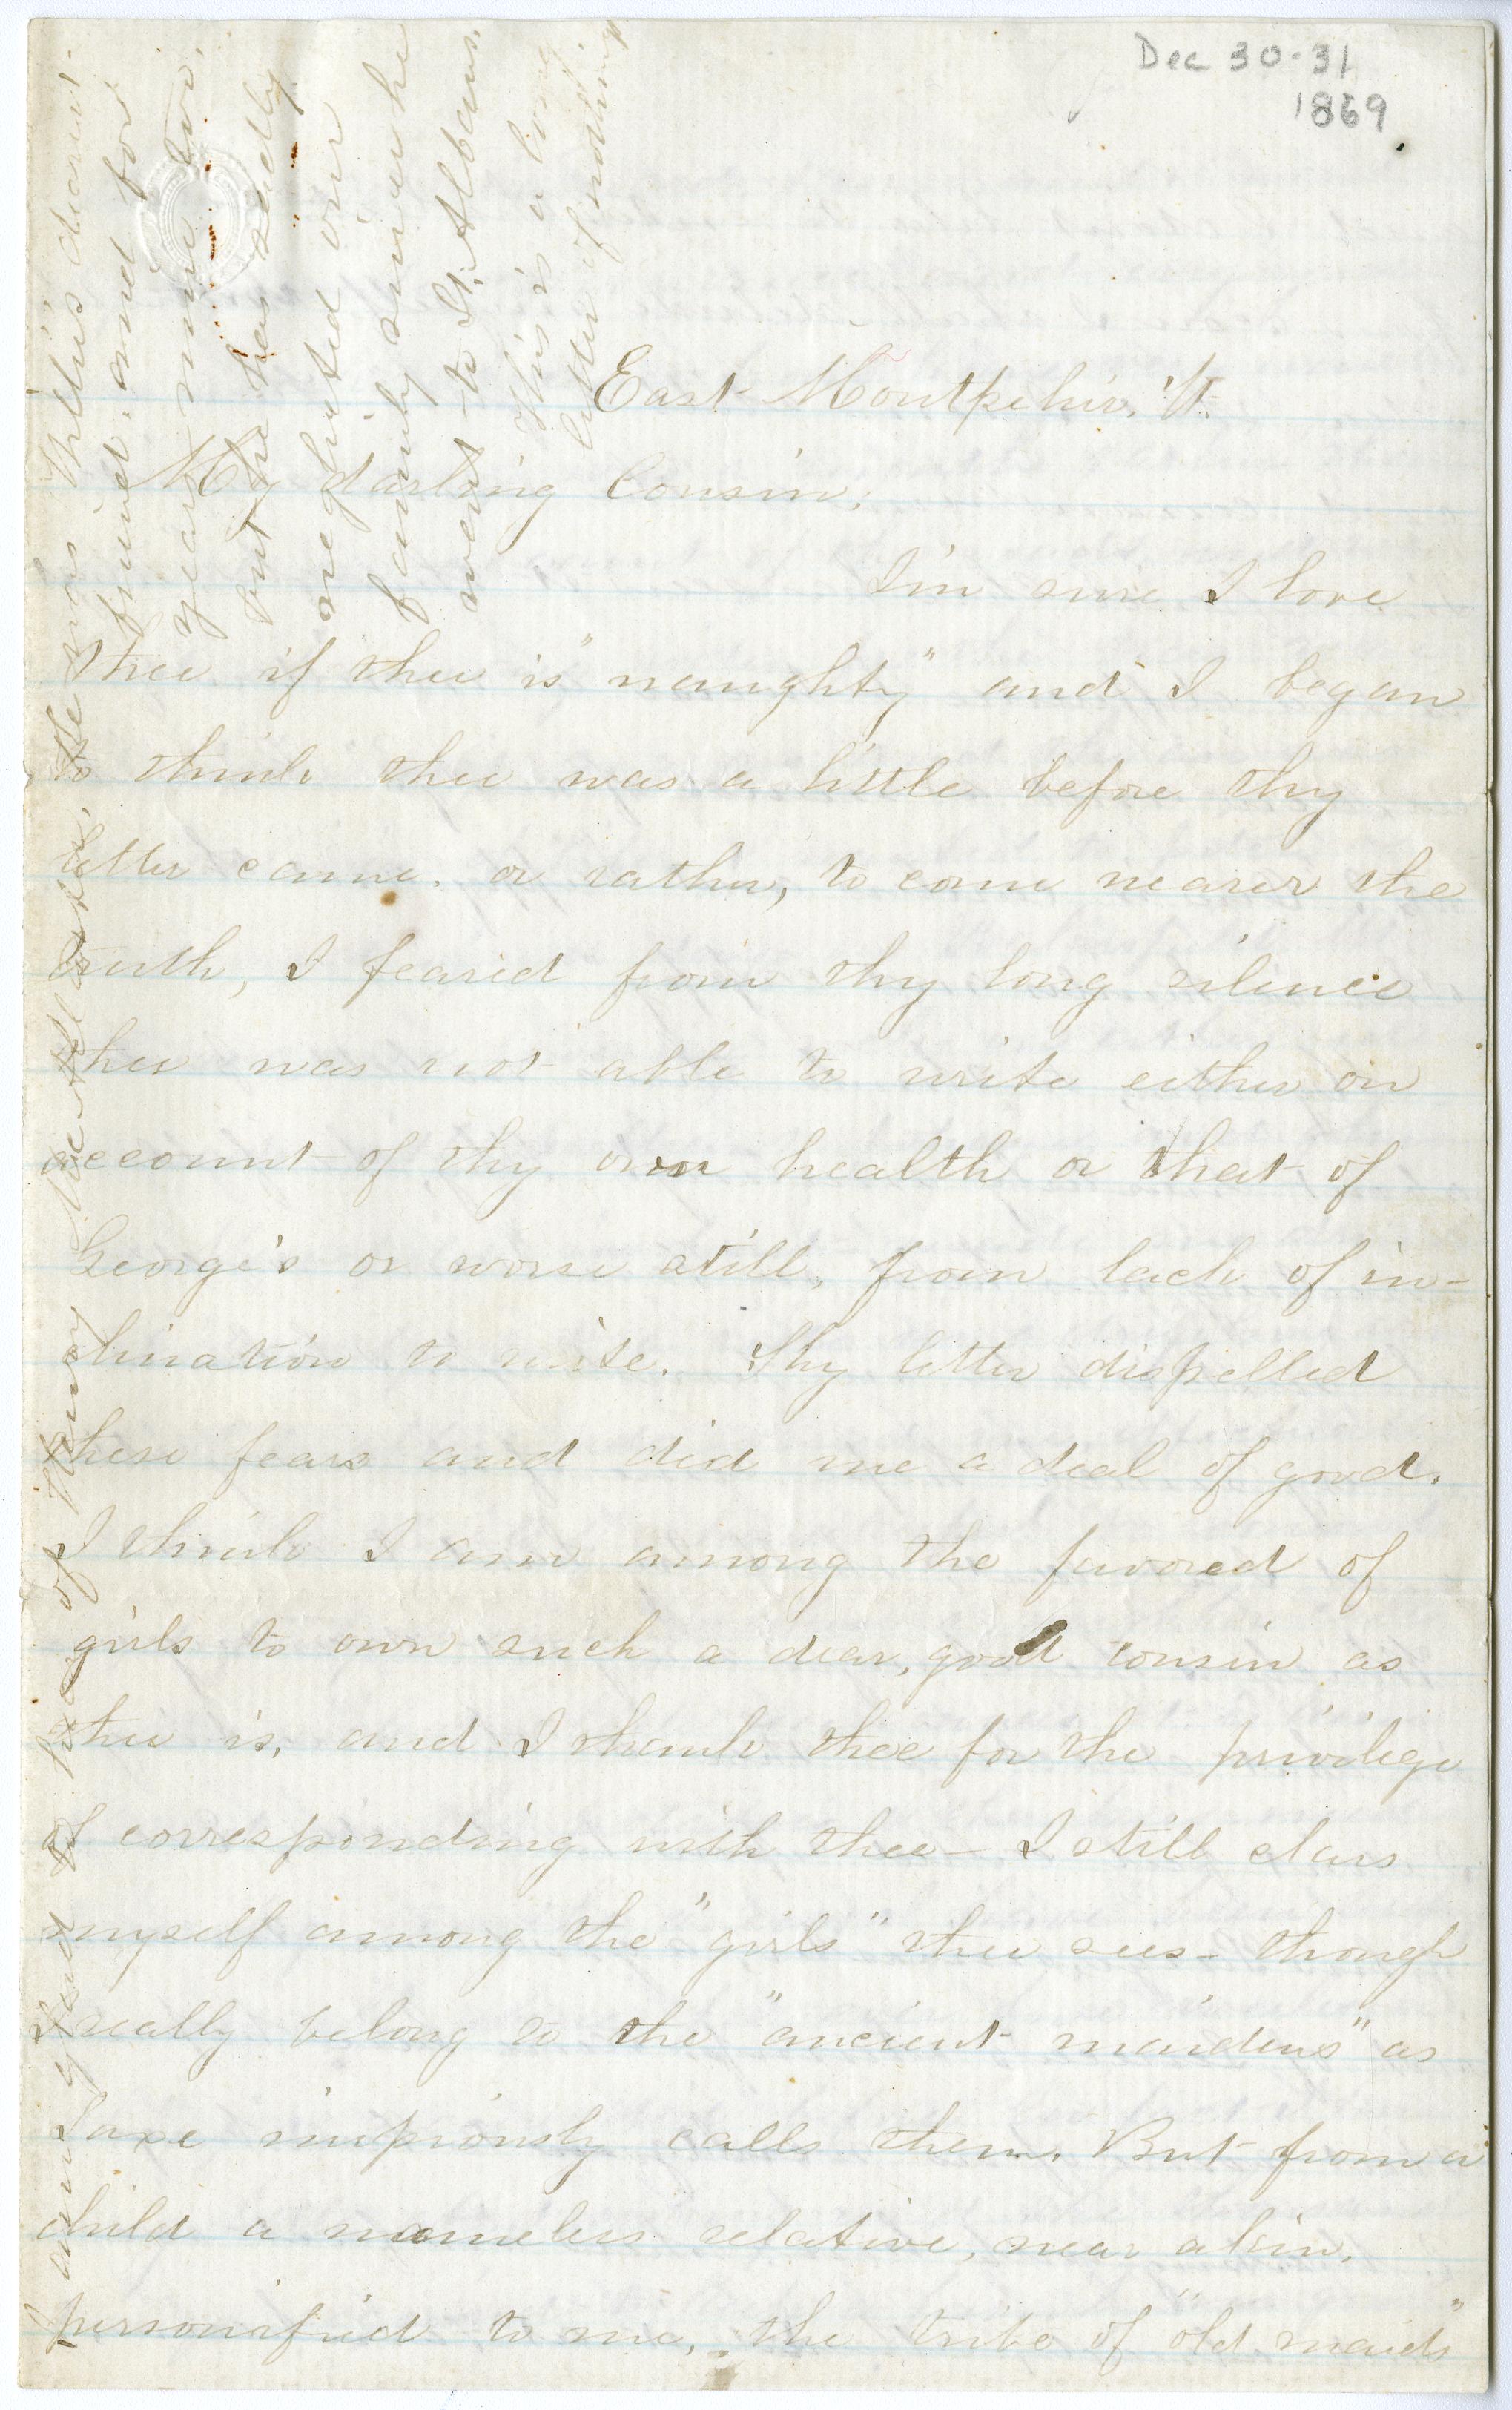 Robinson Family Papers